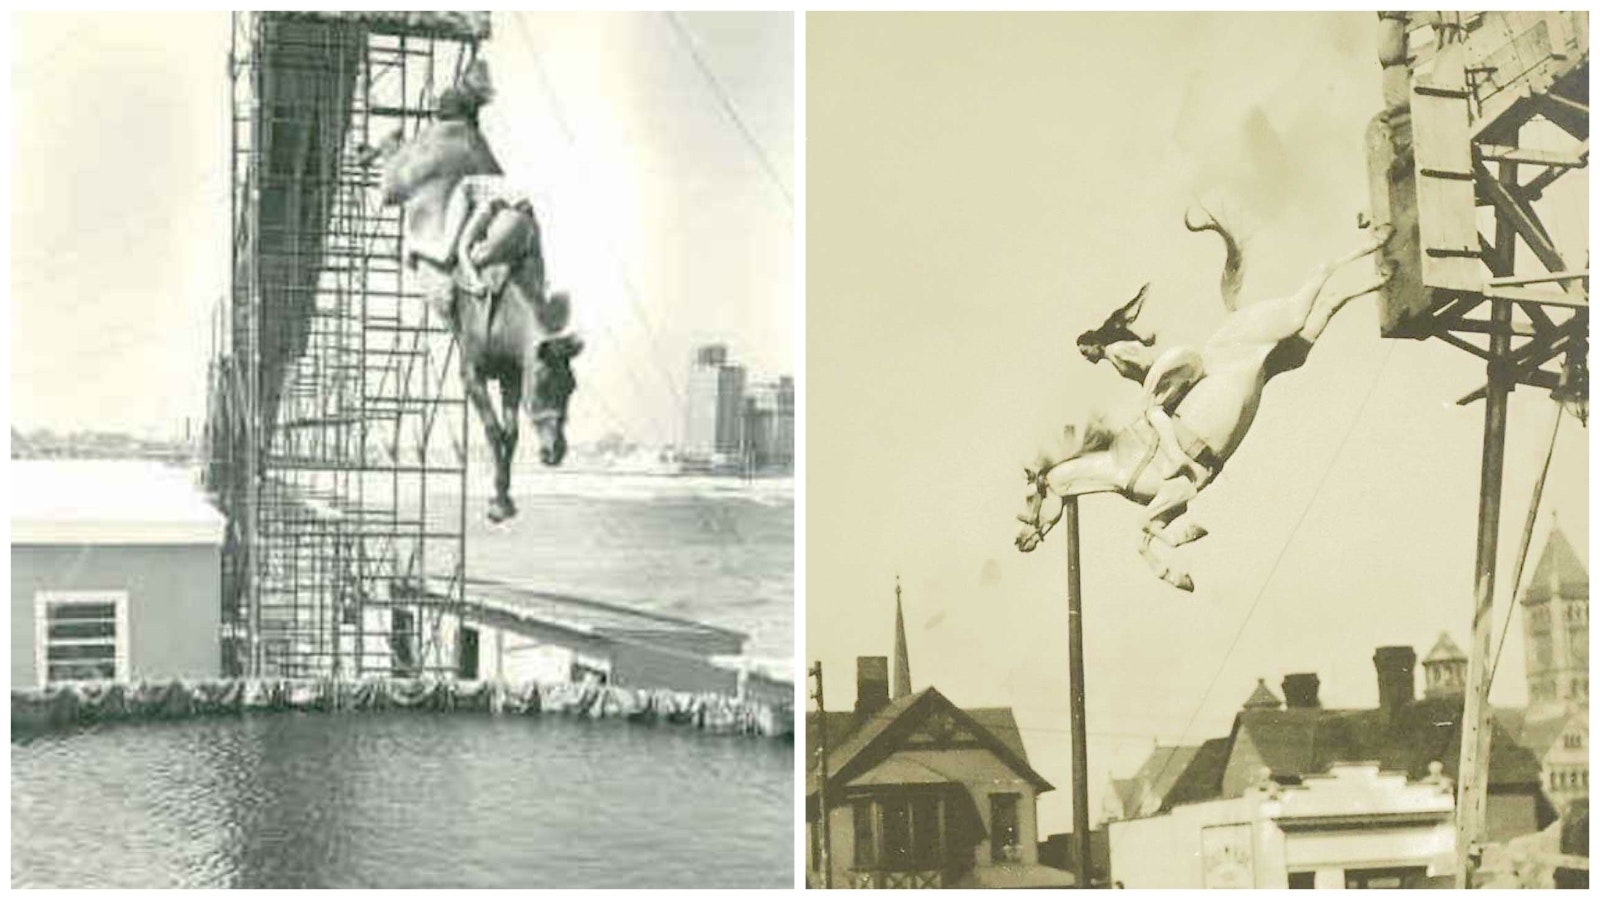 Oscar Smith's dive to death, left. At right, Two Feathers makes a jump.